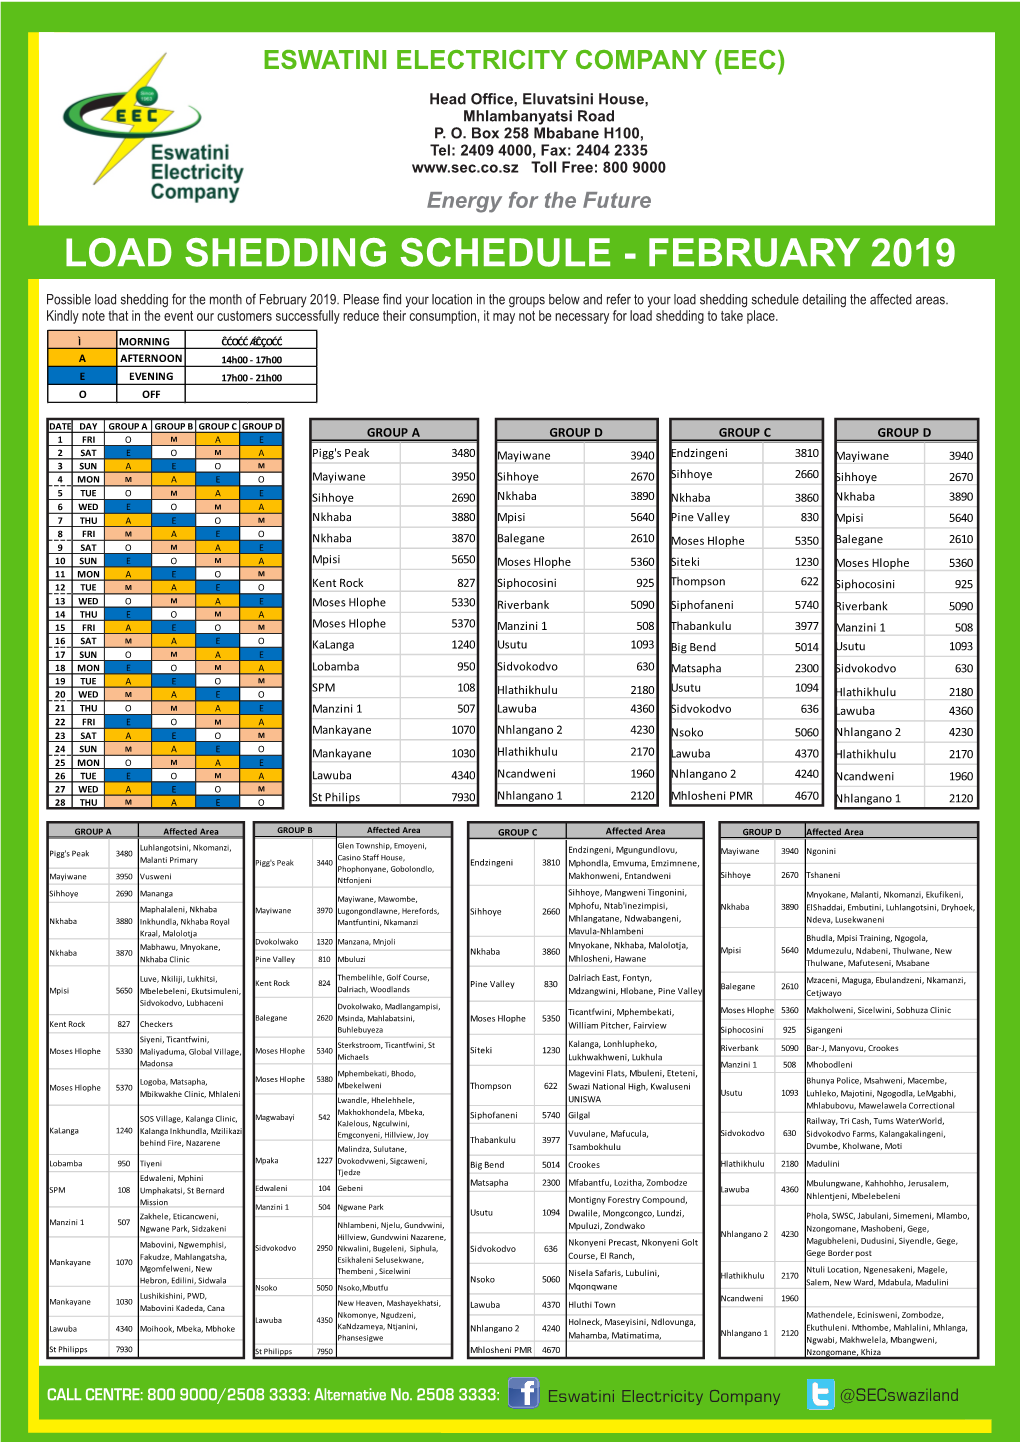 Load Shedding Schedule - February 2019